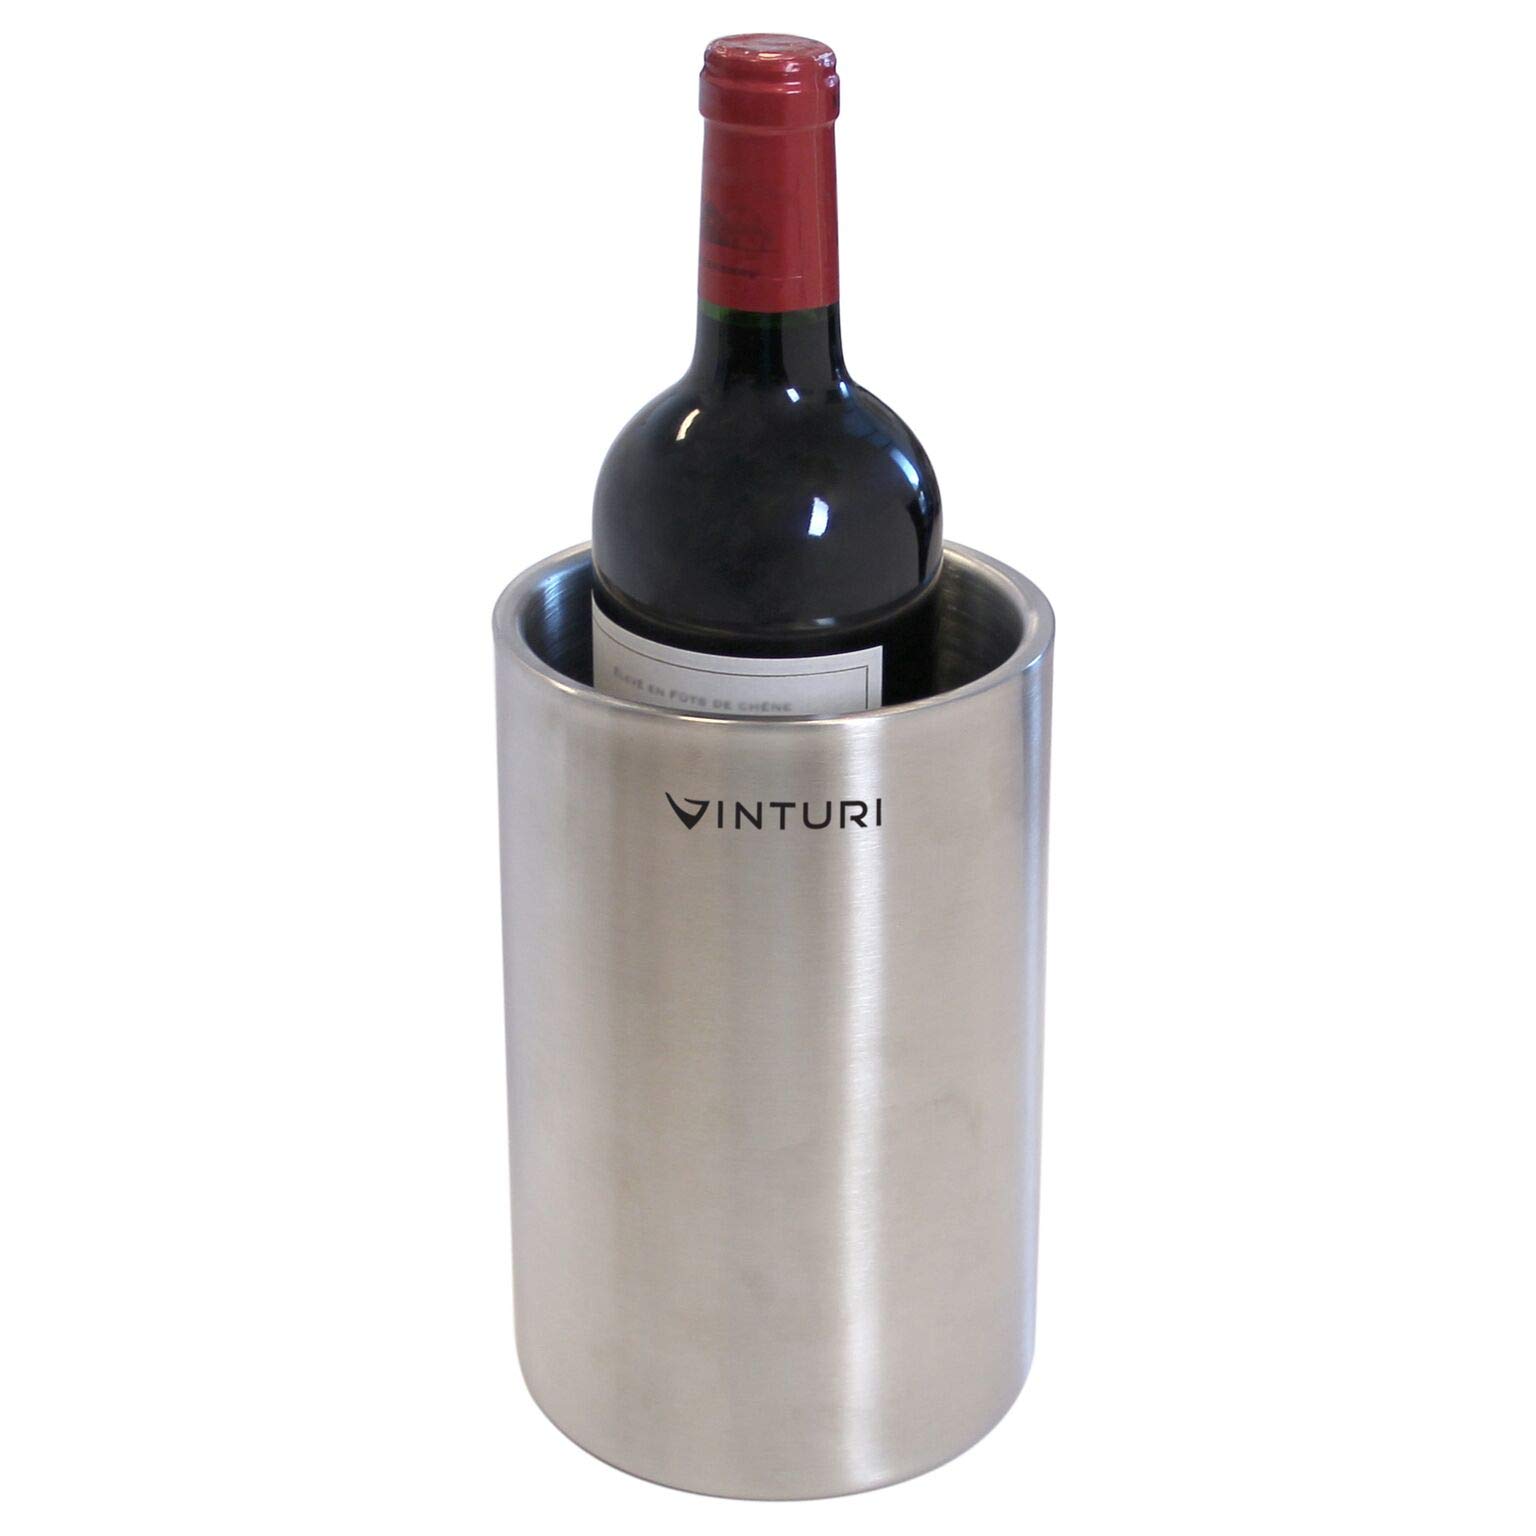 Vinturi V9073 Stainless Steel Double Walled Wine and Champagne Cooler No Ice Required, Silver